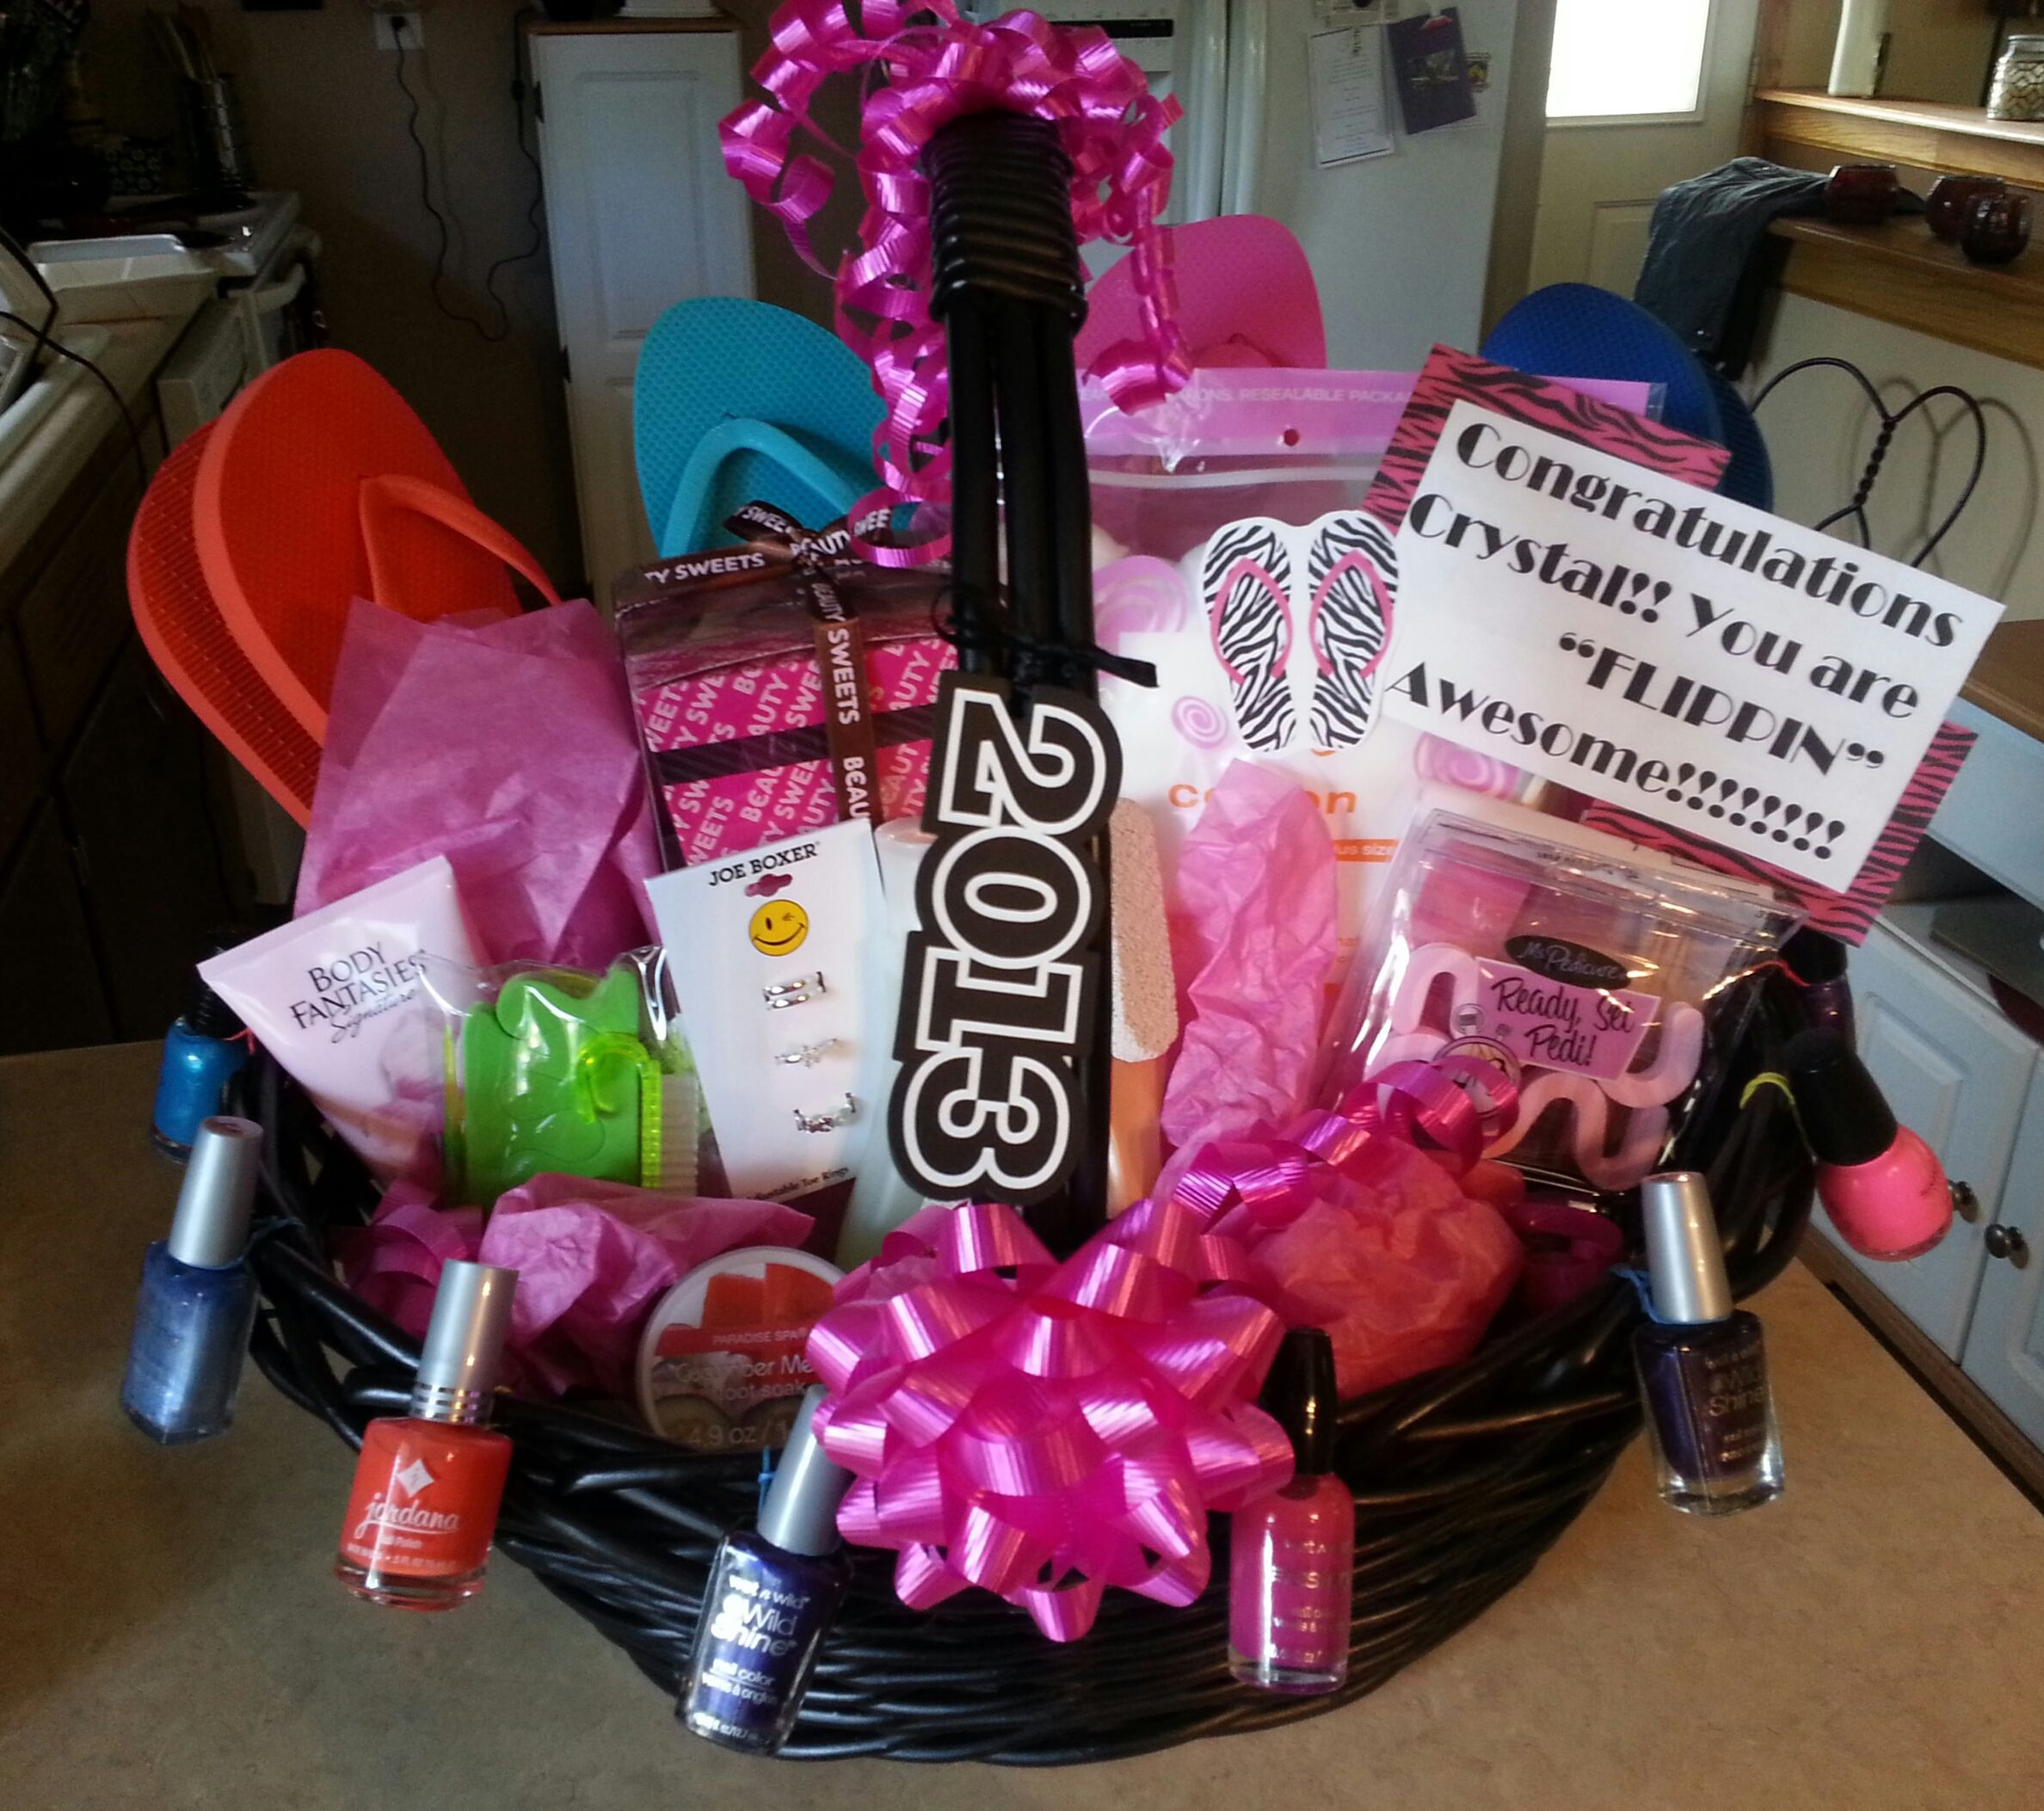 High School Graduation Gift Ideas For Niece
 Great Graduation Gift for a girl Made this one for my